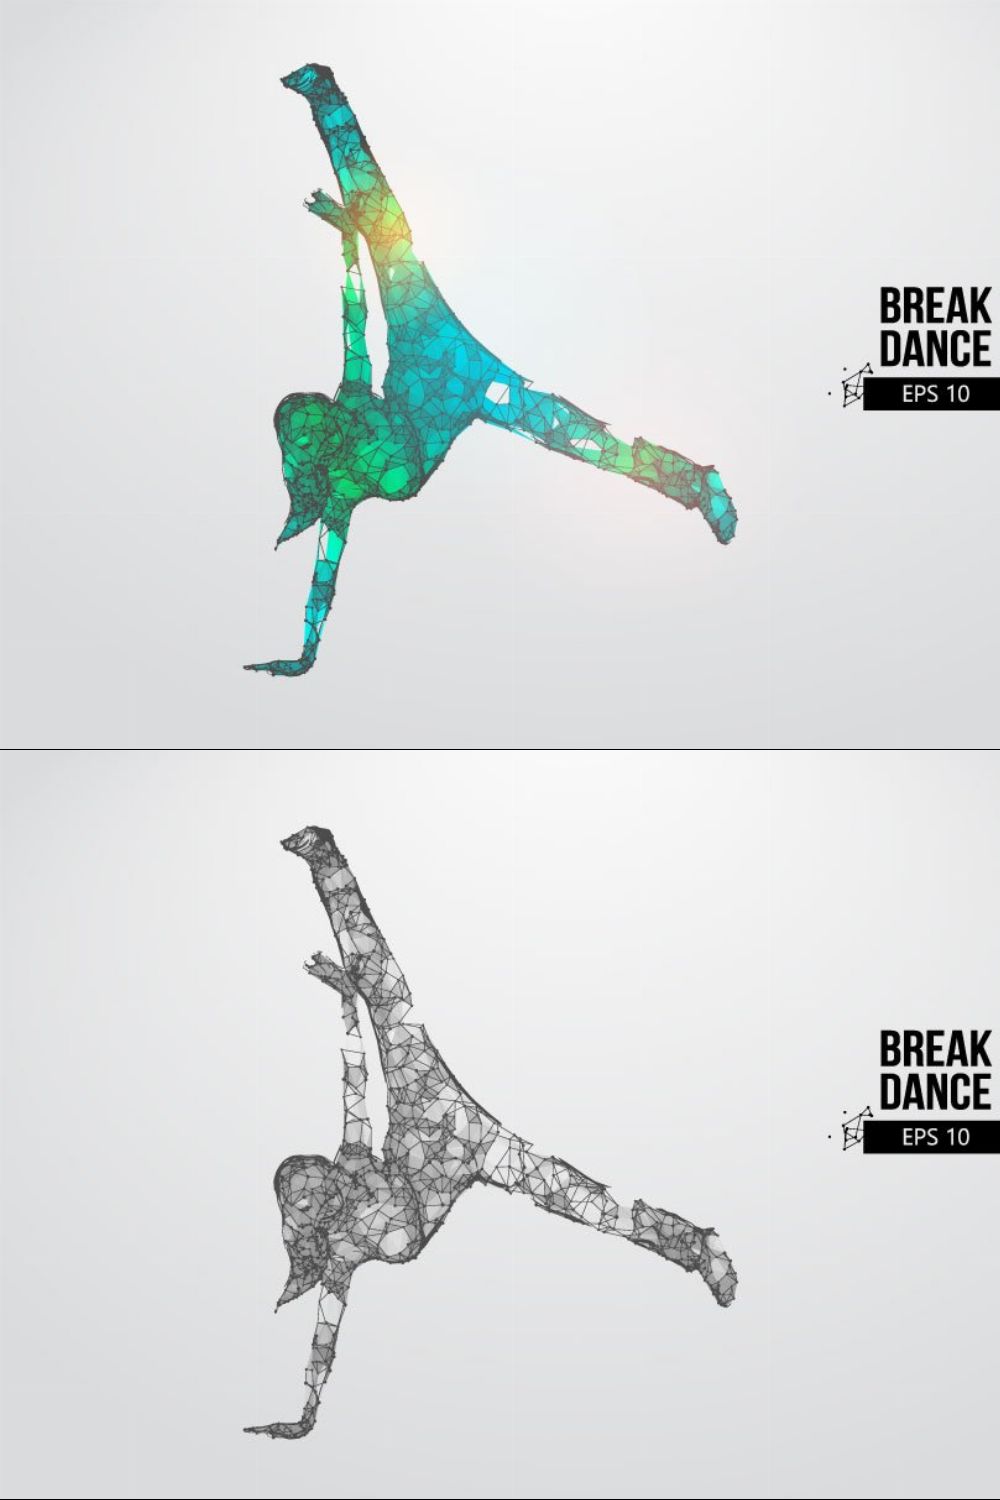 Silhouettes of a breake dancer woman pinterest preview image.